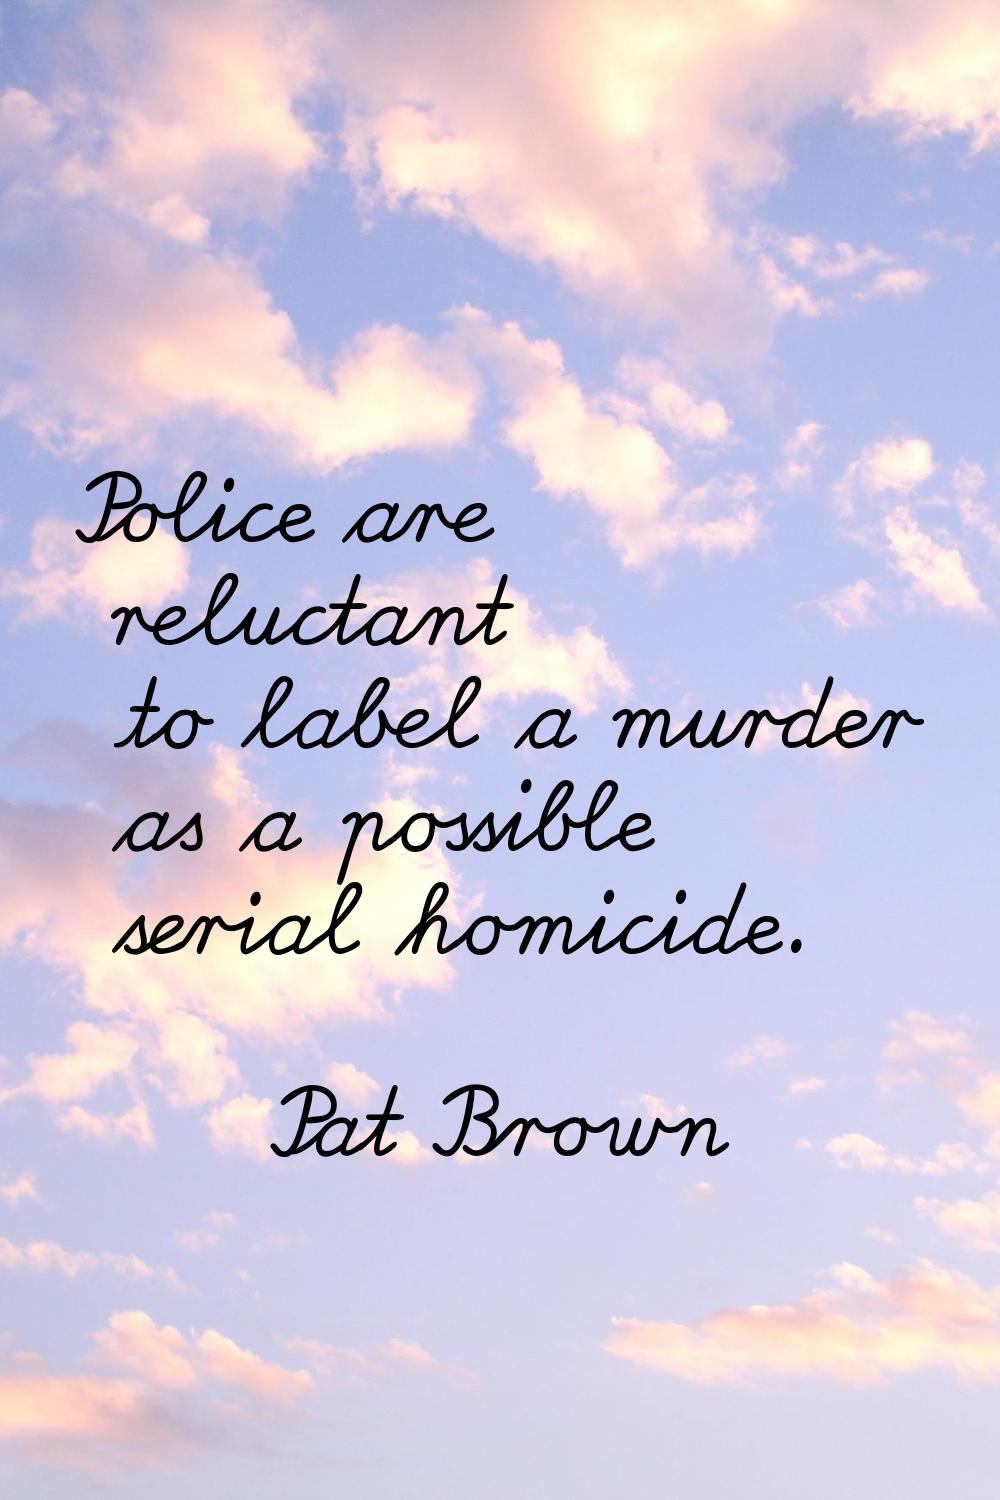 Police are reluctant to label a murder as a possible serial homicide.